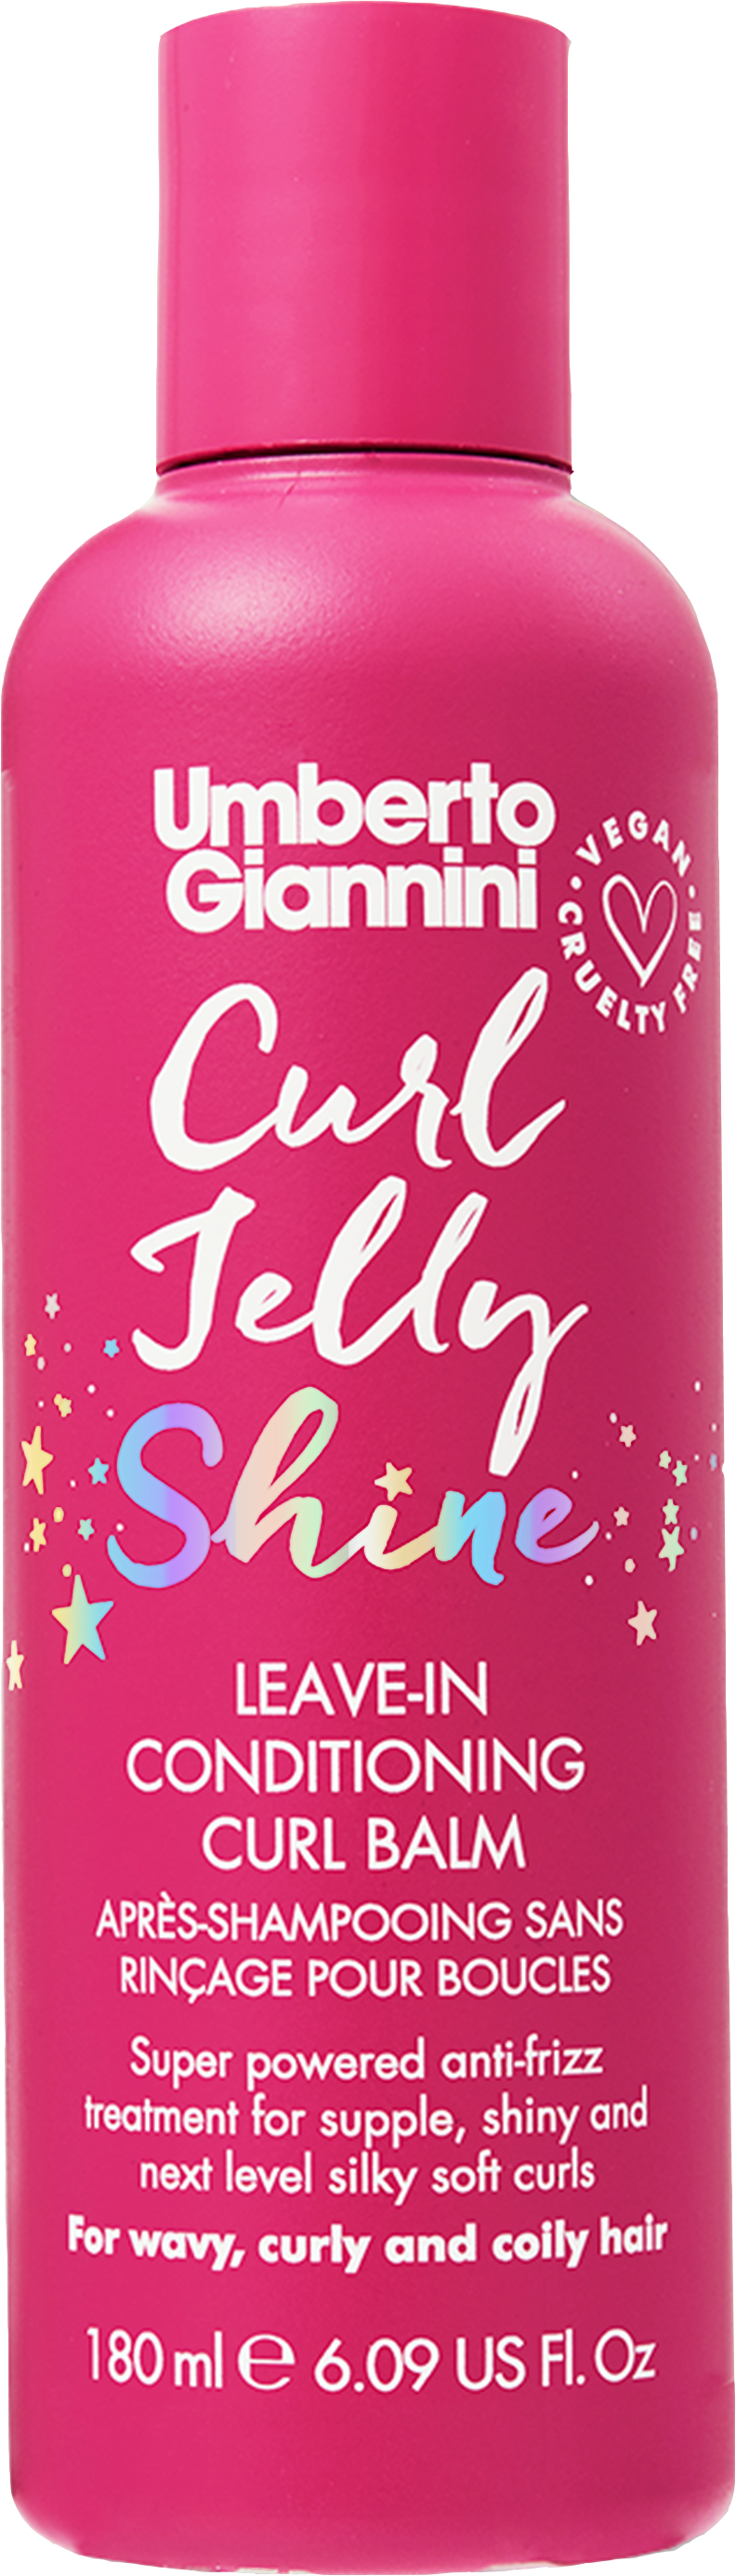 Umberto Giannini Curl Jelly Shine Leave-In Conditioner 180 ml